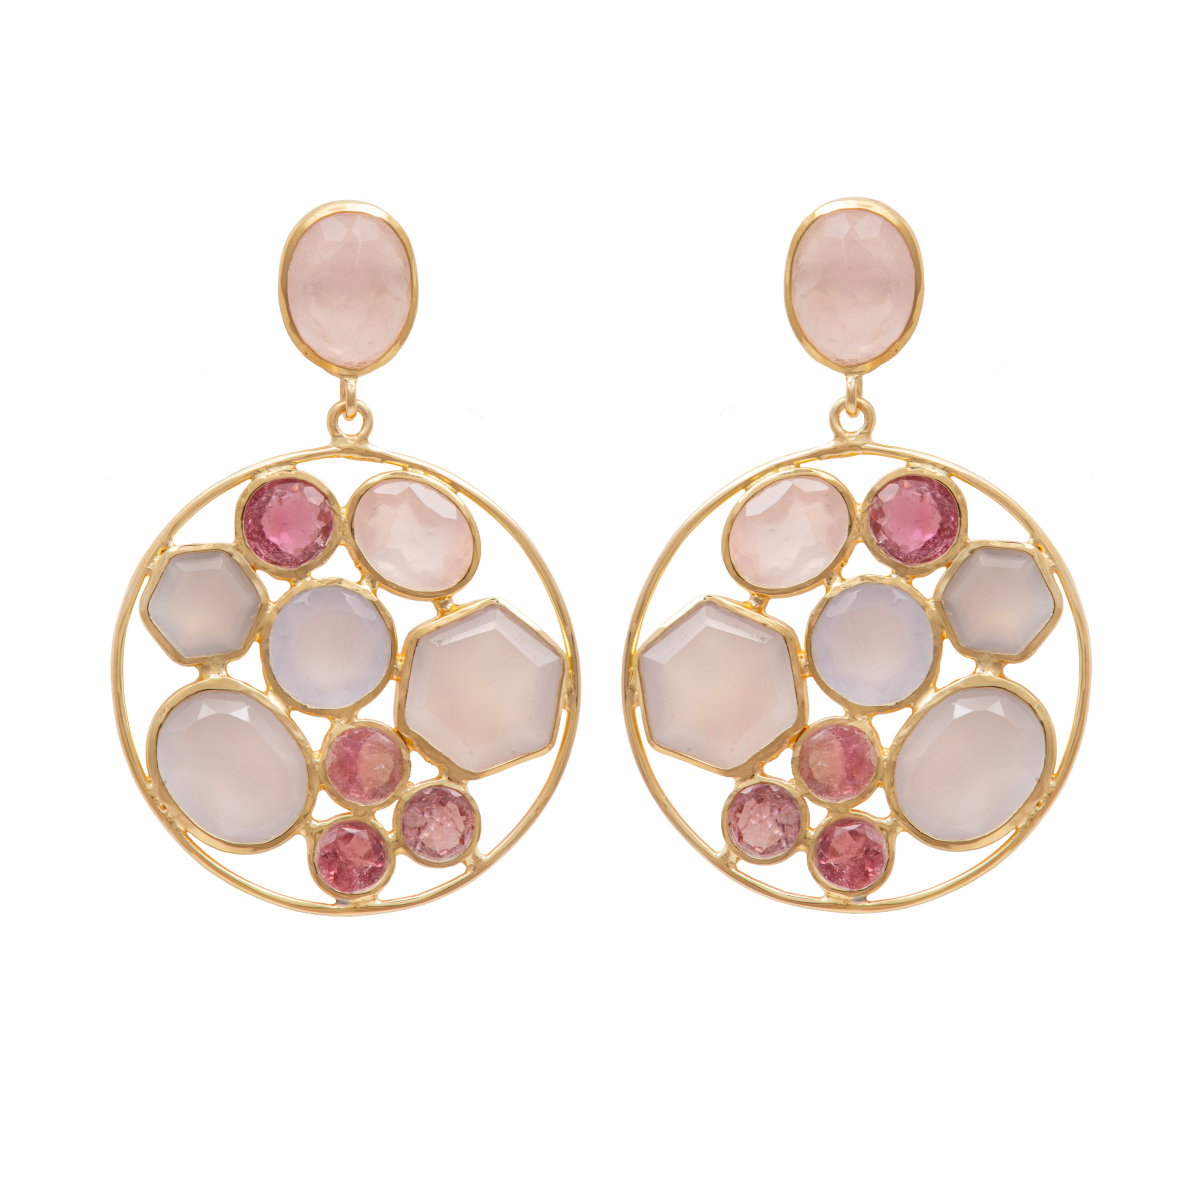 Long Gemstone Earrings with a Round Disc Drop with Stones in Gold Plated Sterling Silver - Rose Quartz and Pink Chalcedony